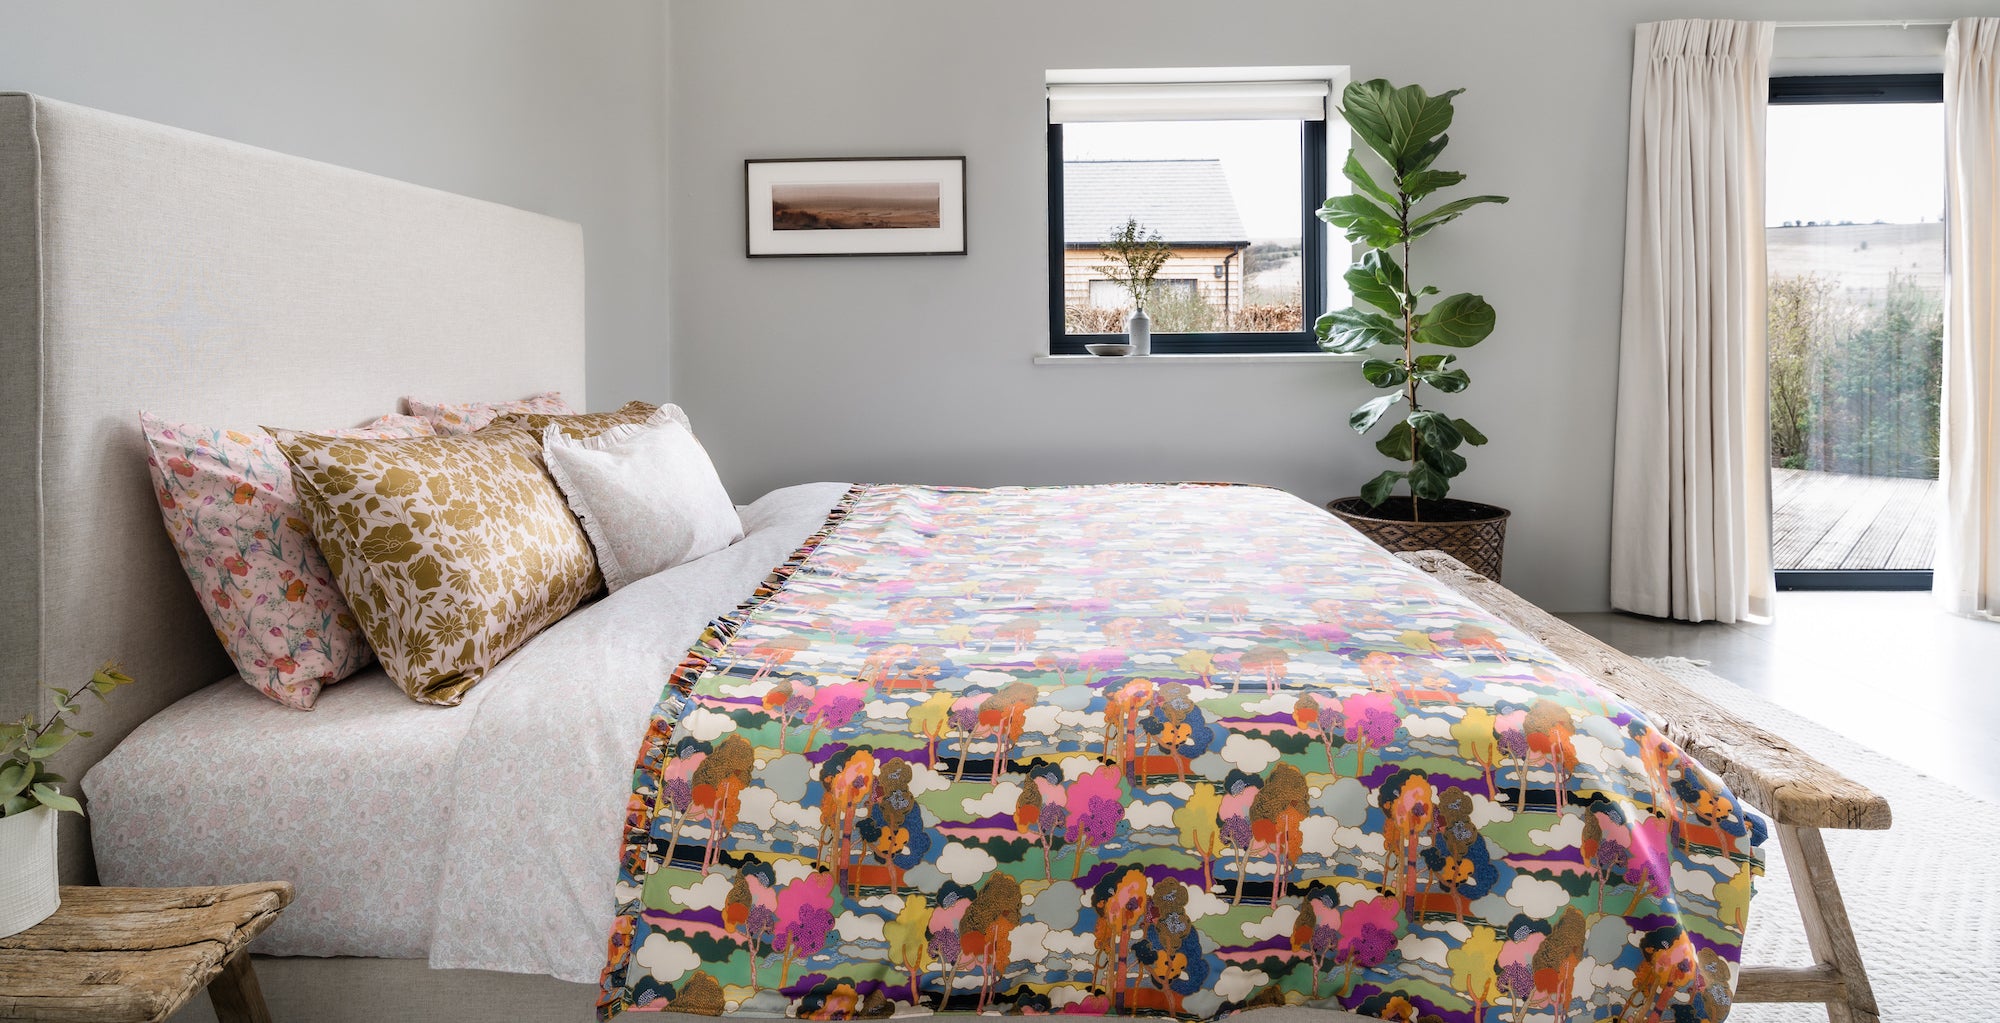 Bedspreads and throws in Liberty fabrics by Coco & Wolf